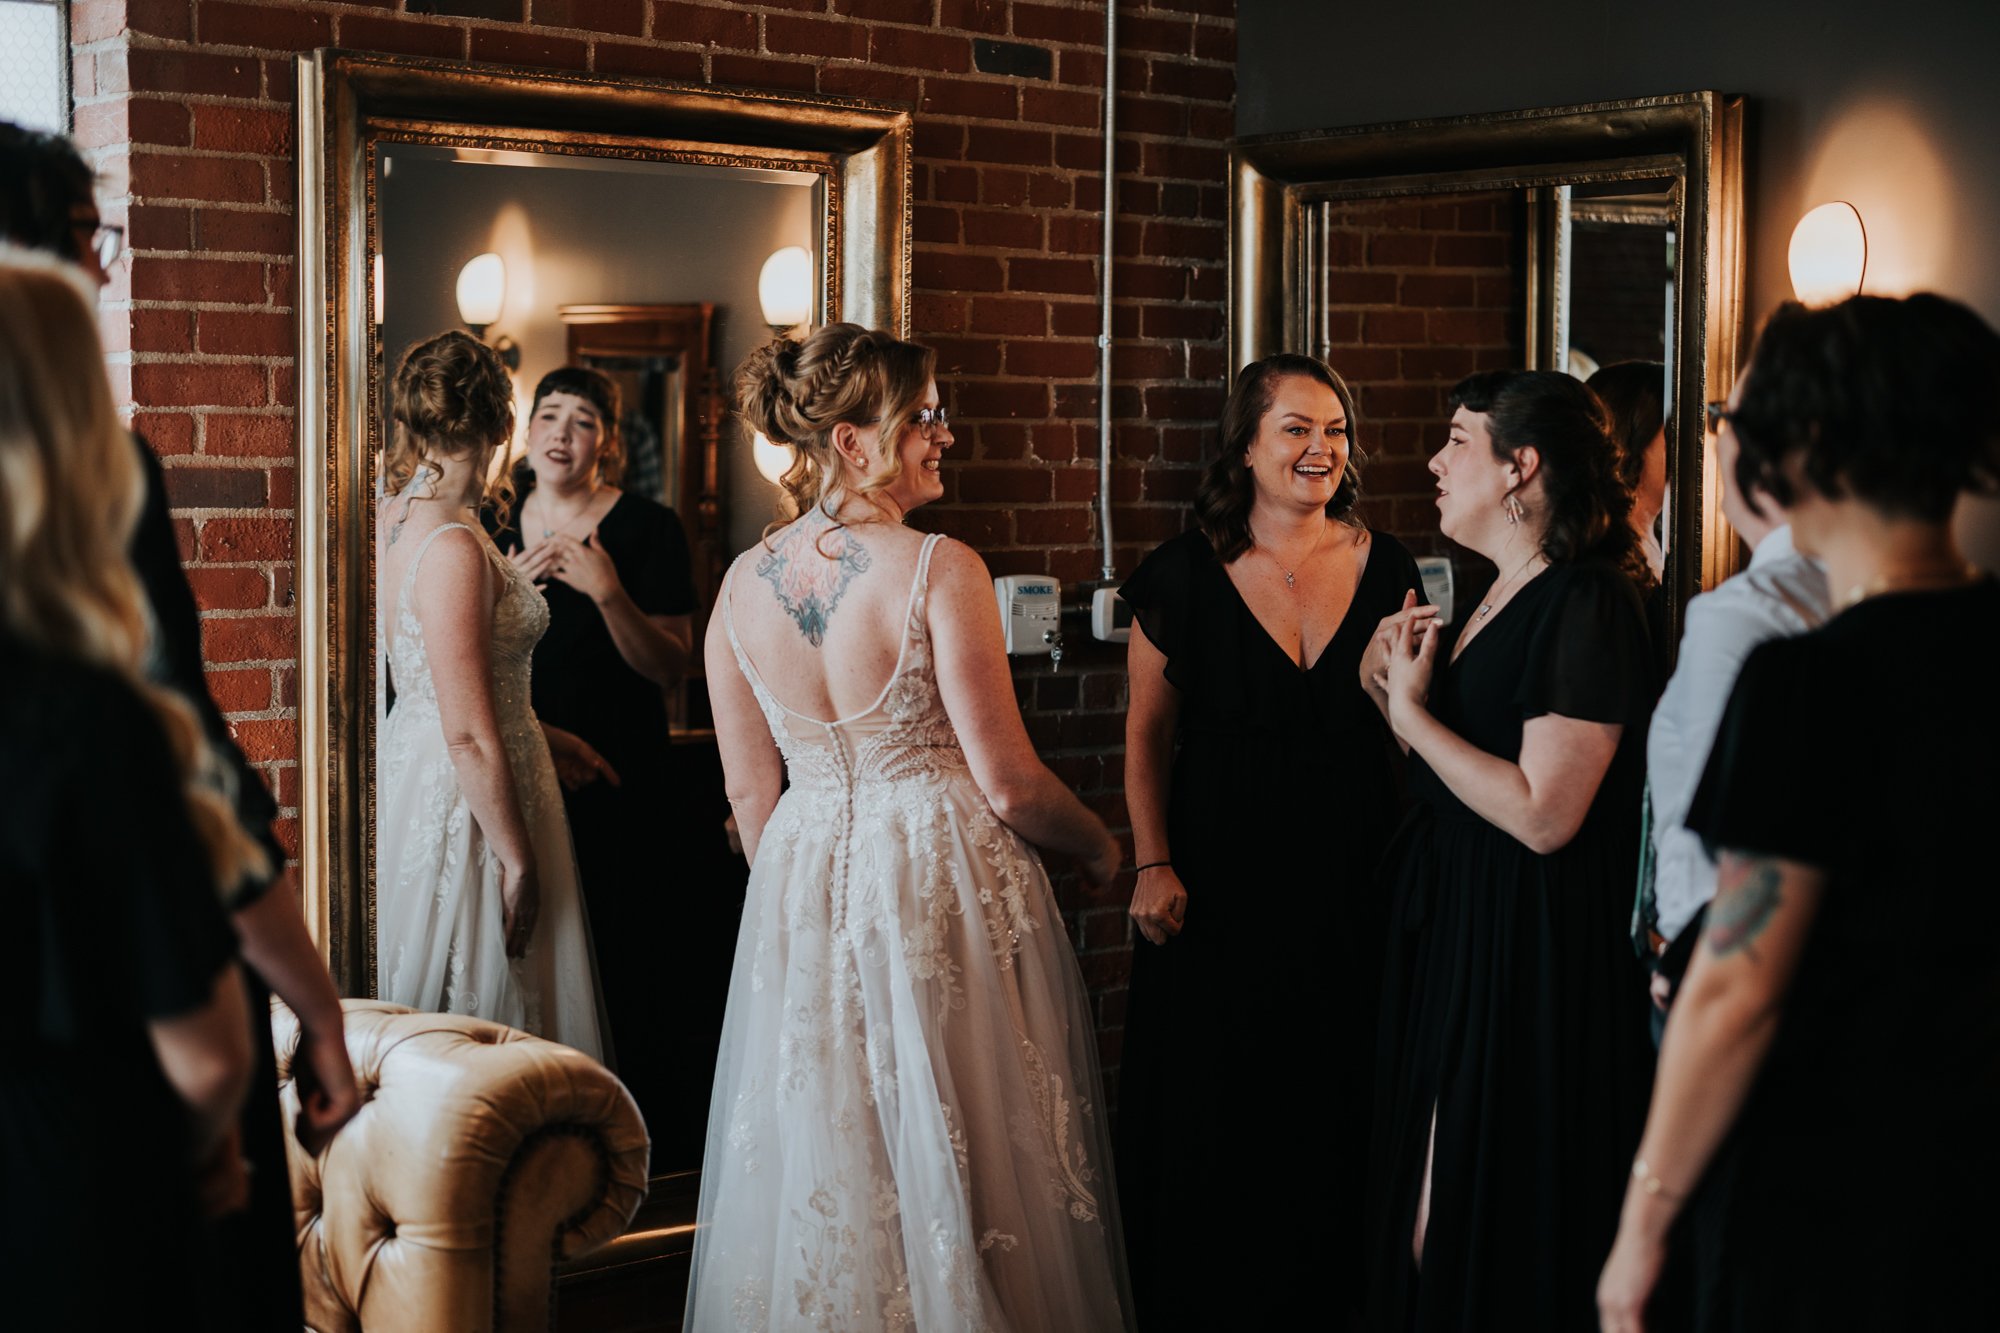 Weddings in Durham, NC - The Cookery